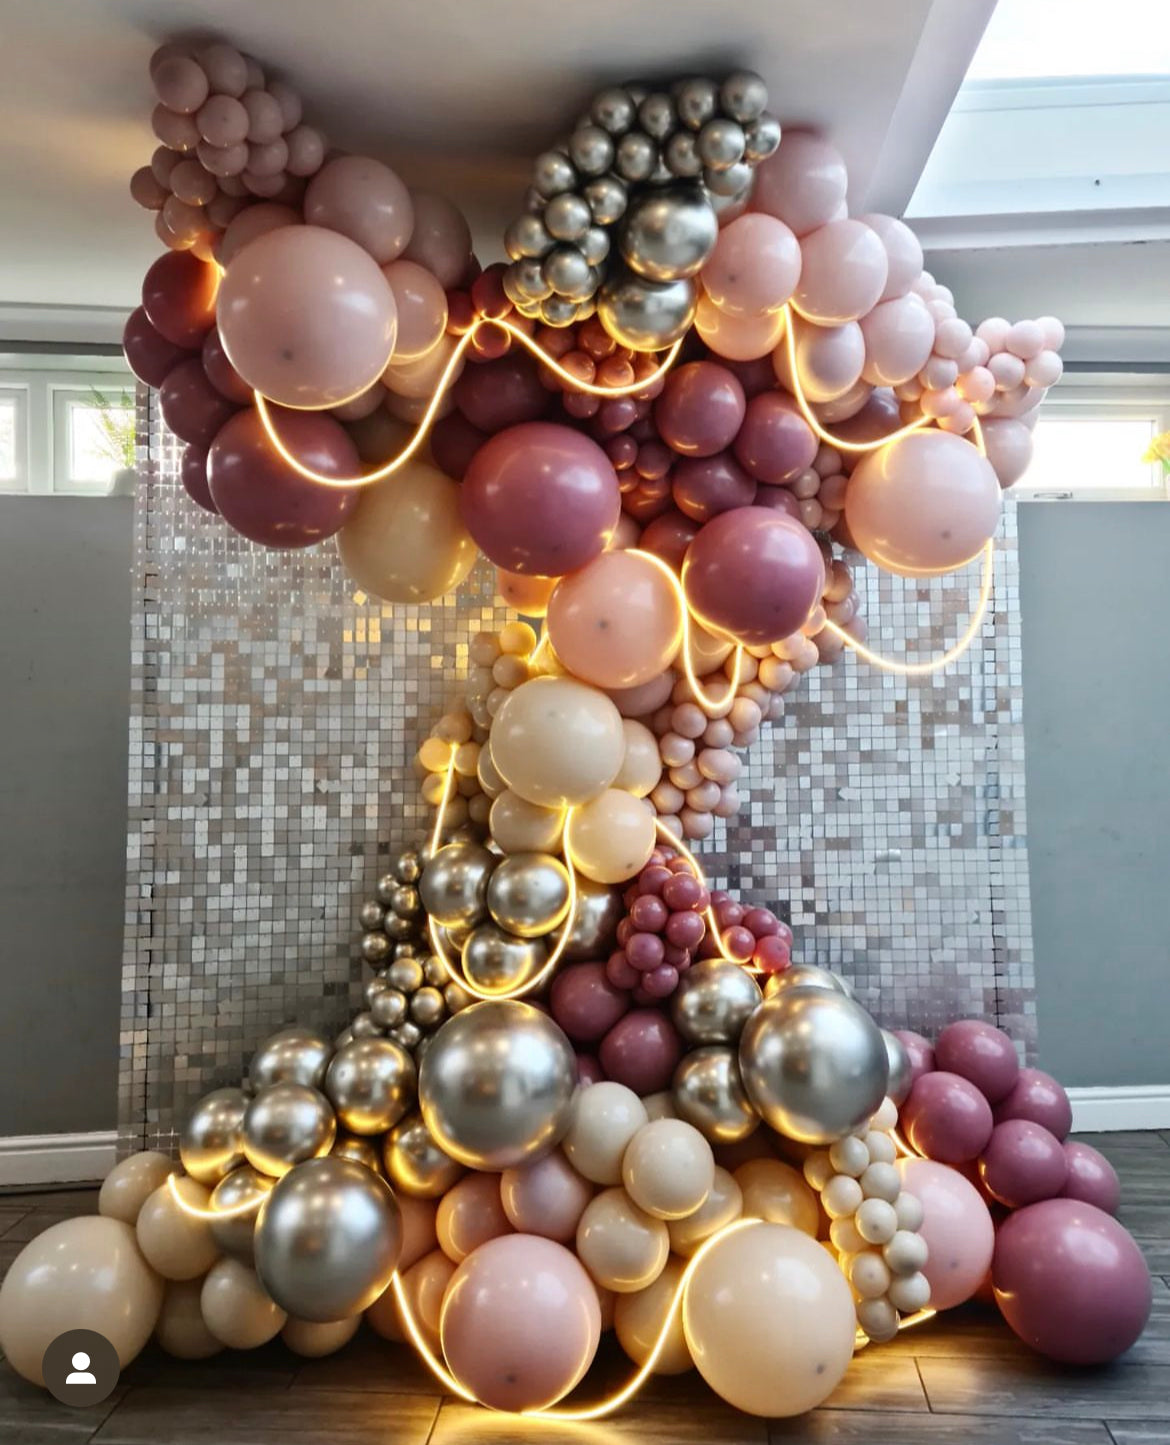 Couture ballons luxueux